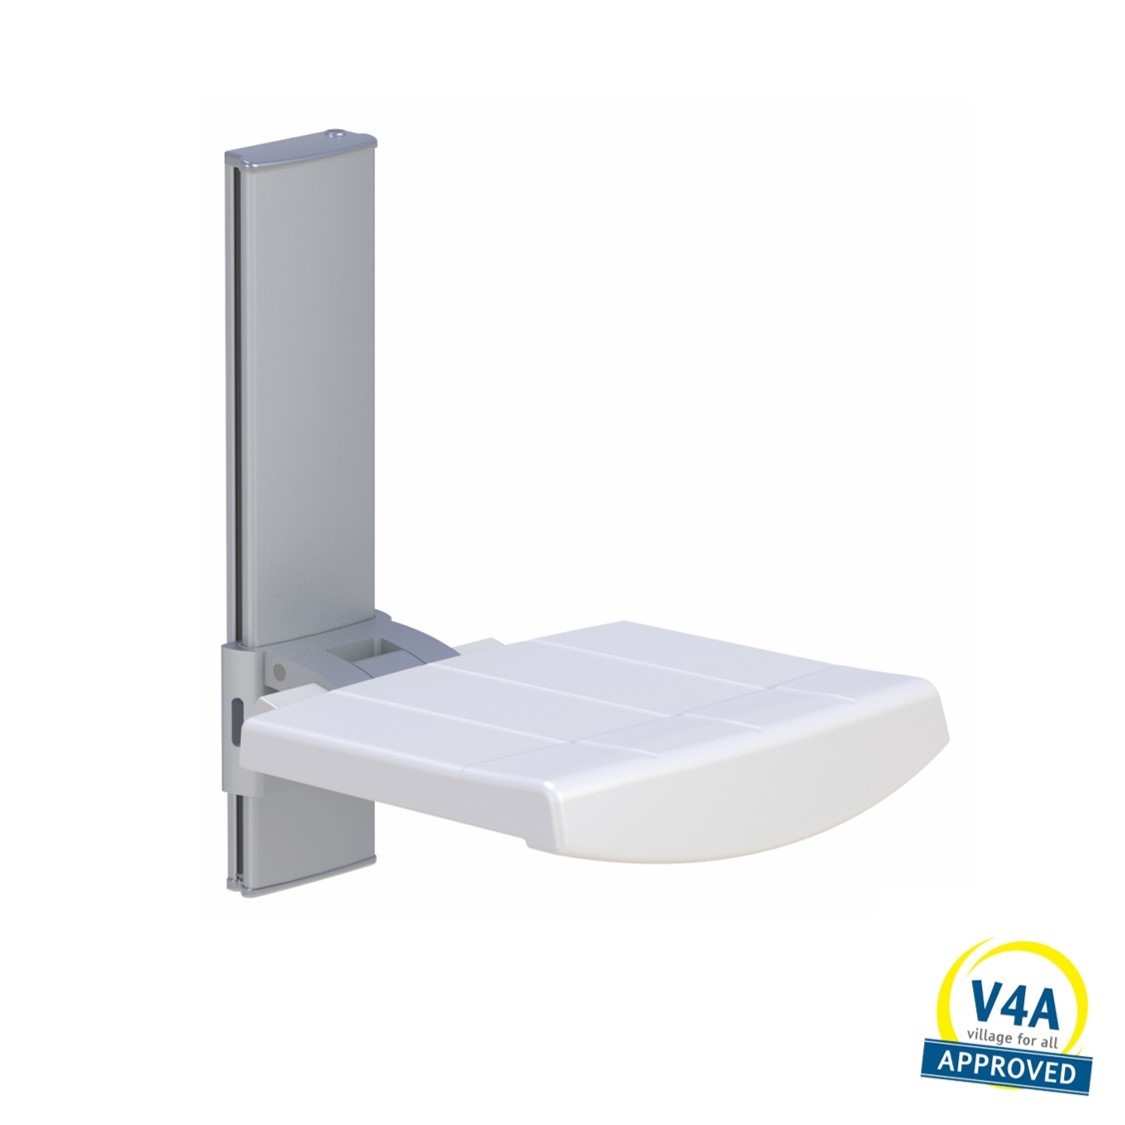 Wall mounted shower seat height adjustable